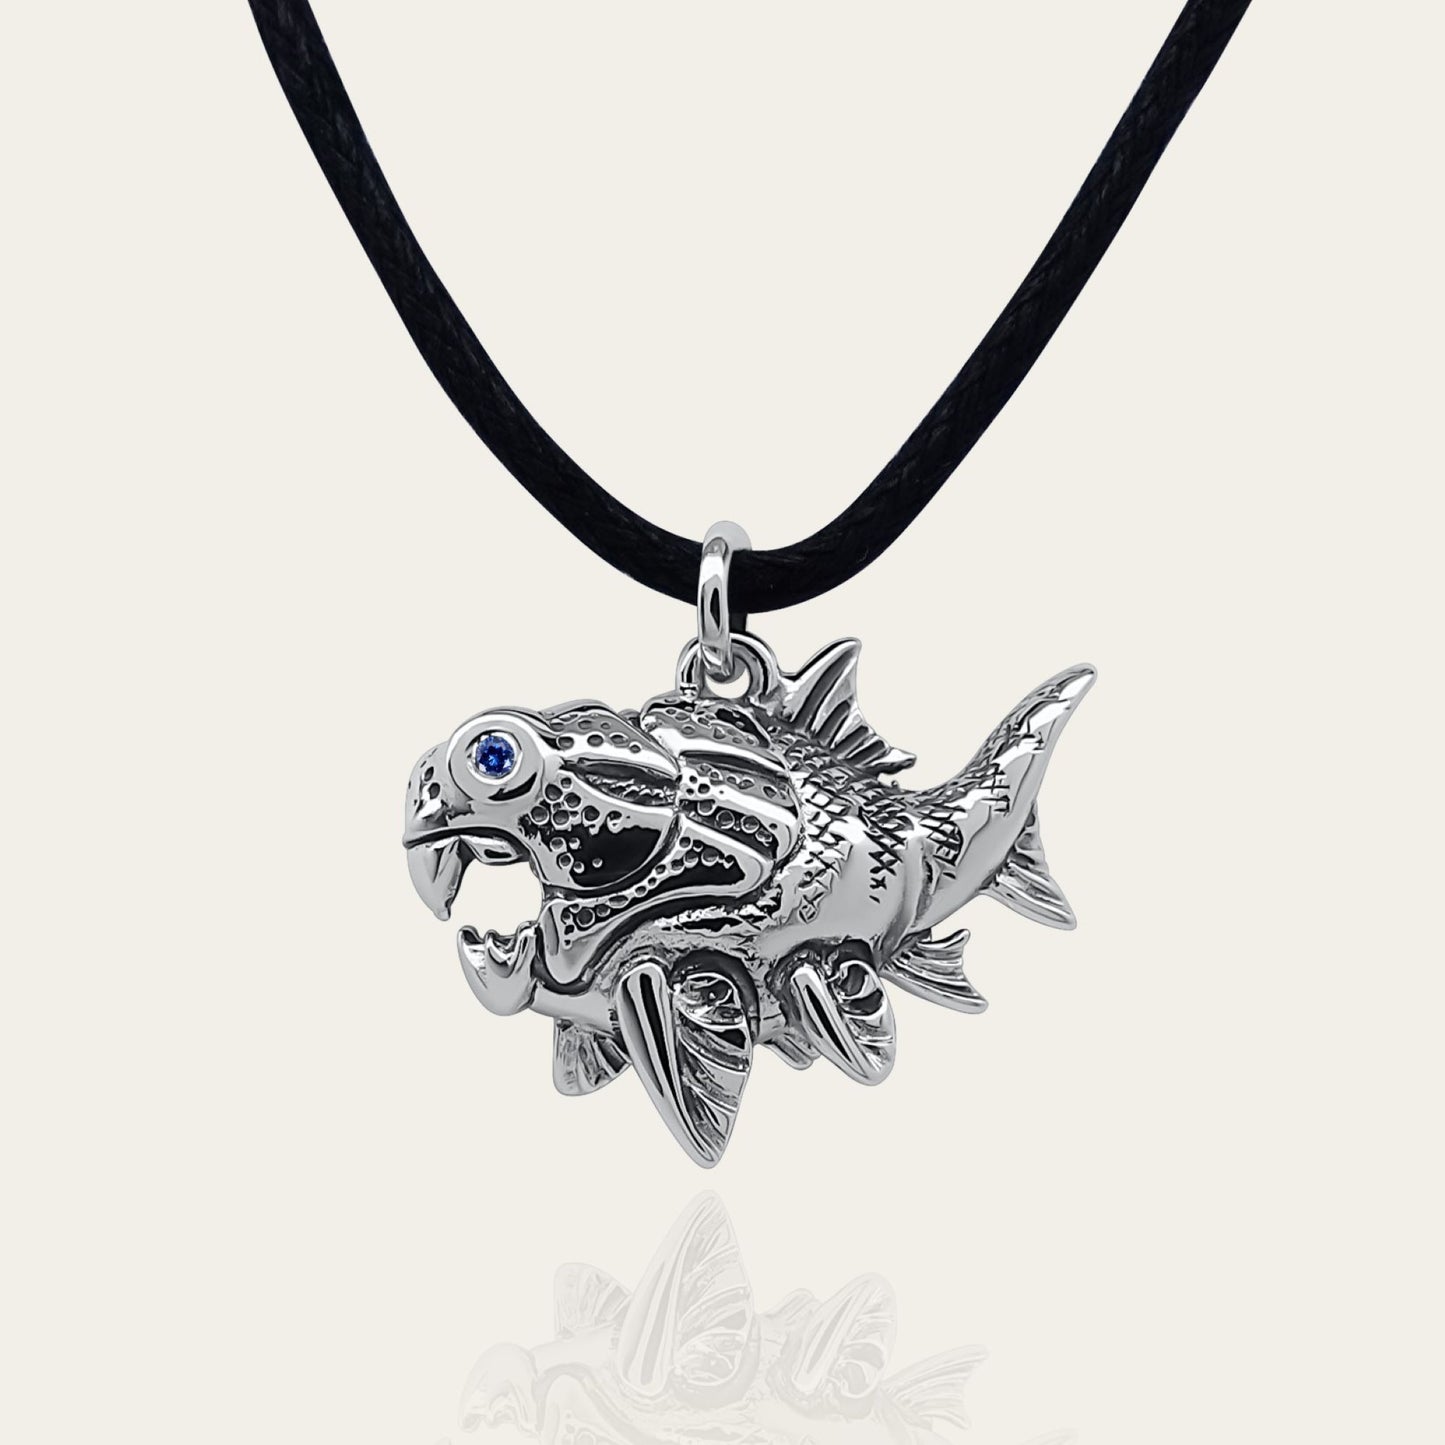 Dunkleosteus necklace. Made from sterling silver with an antiqued finish, set with a gemstone eye. Prehistoric fish pendant © Adrian Ashley